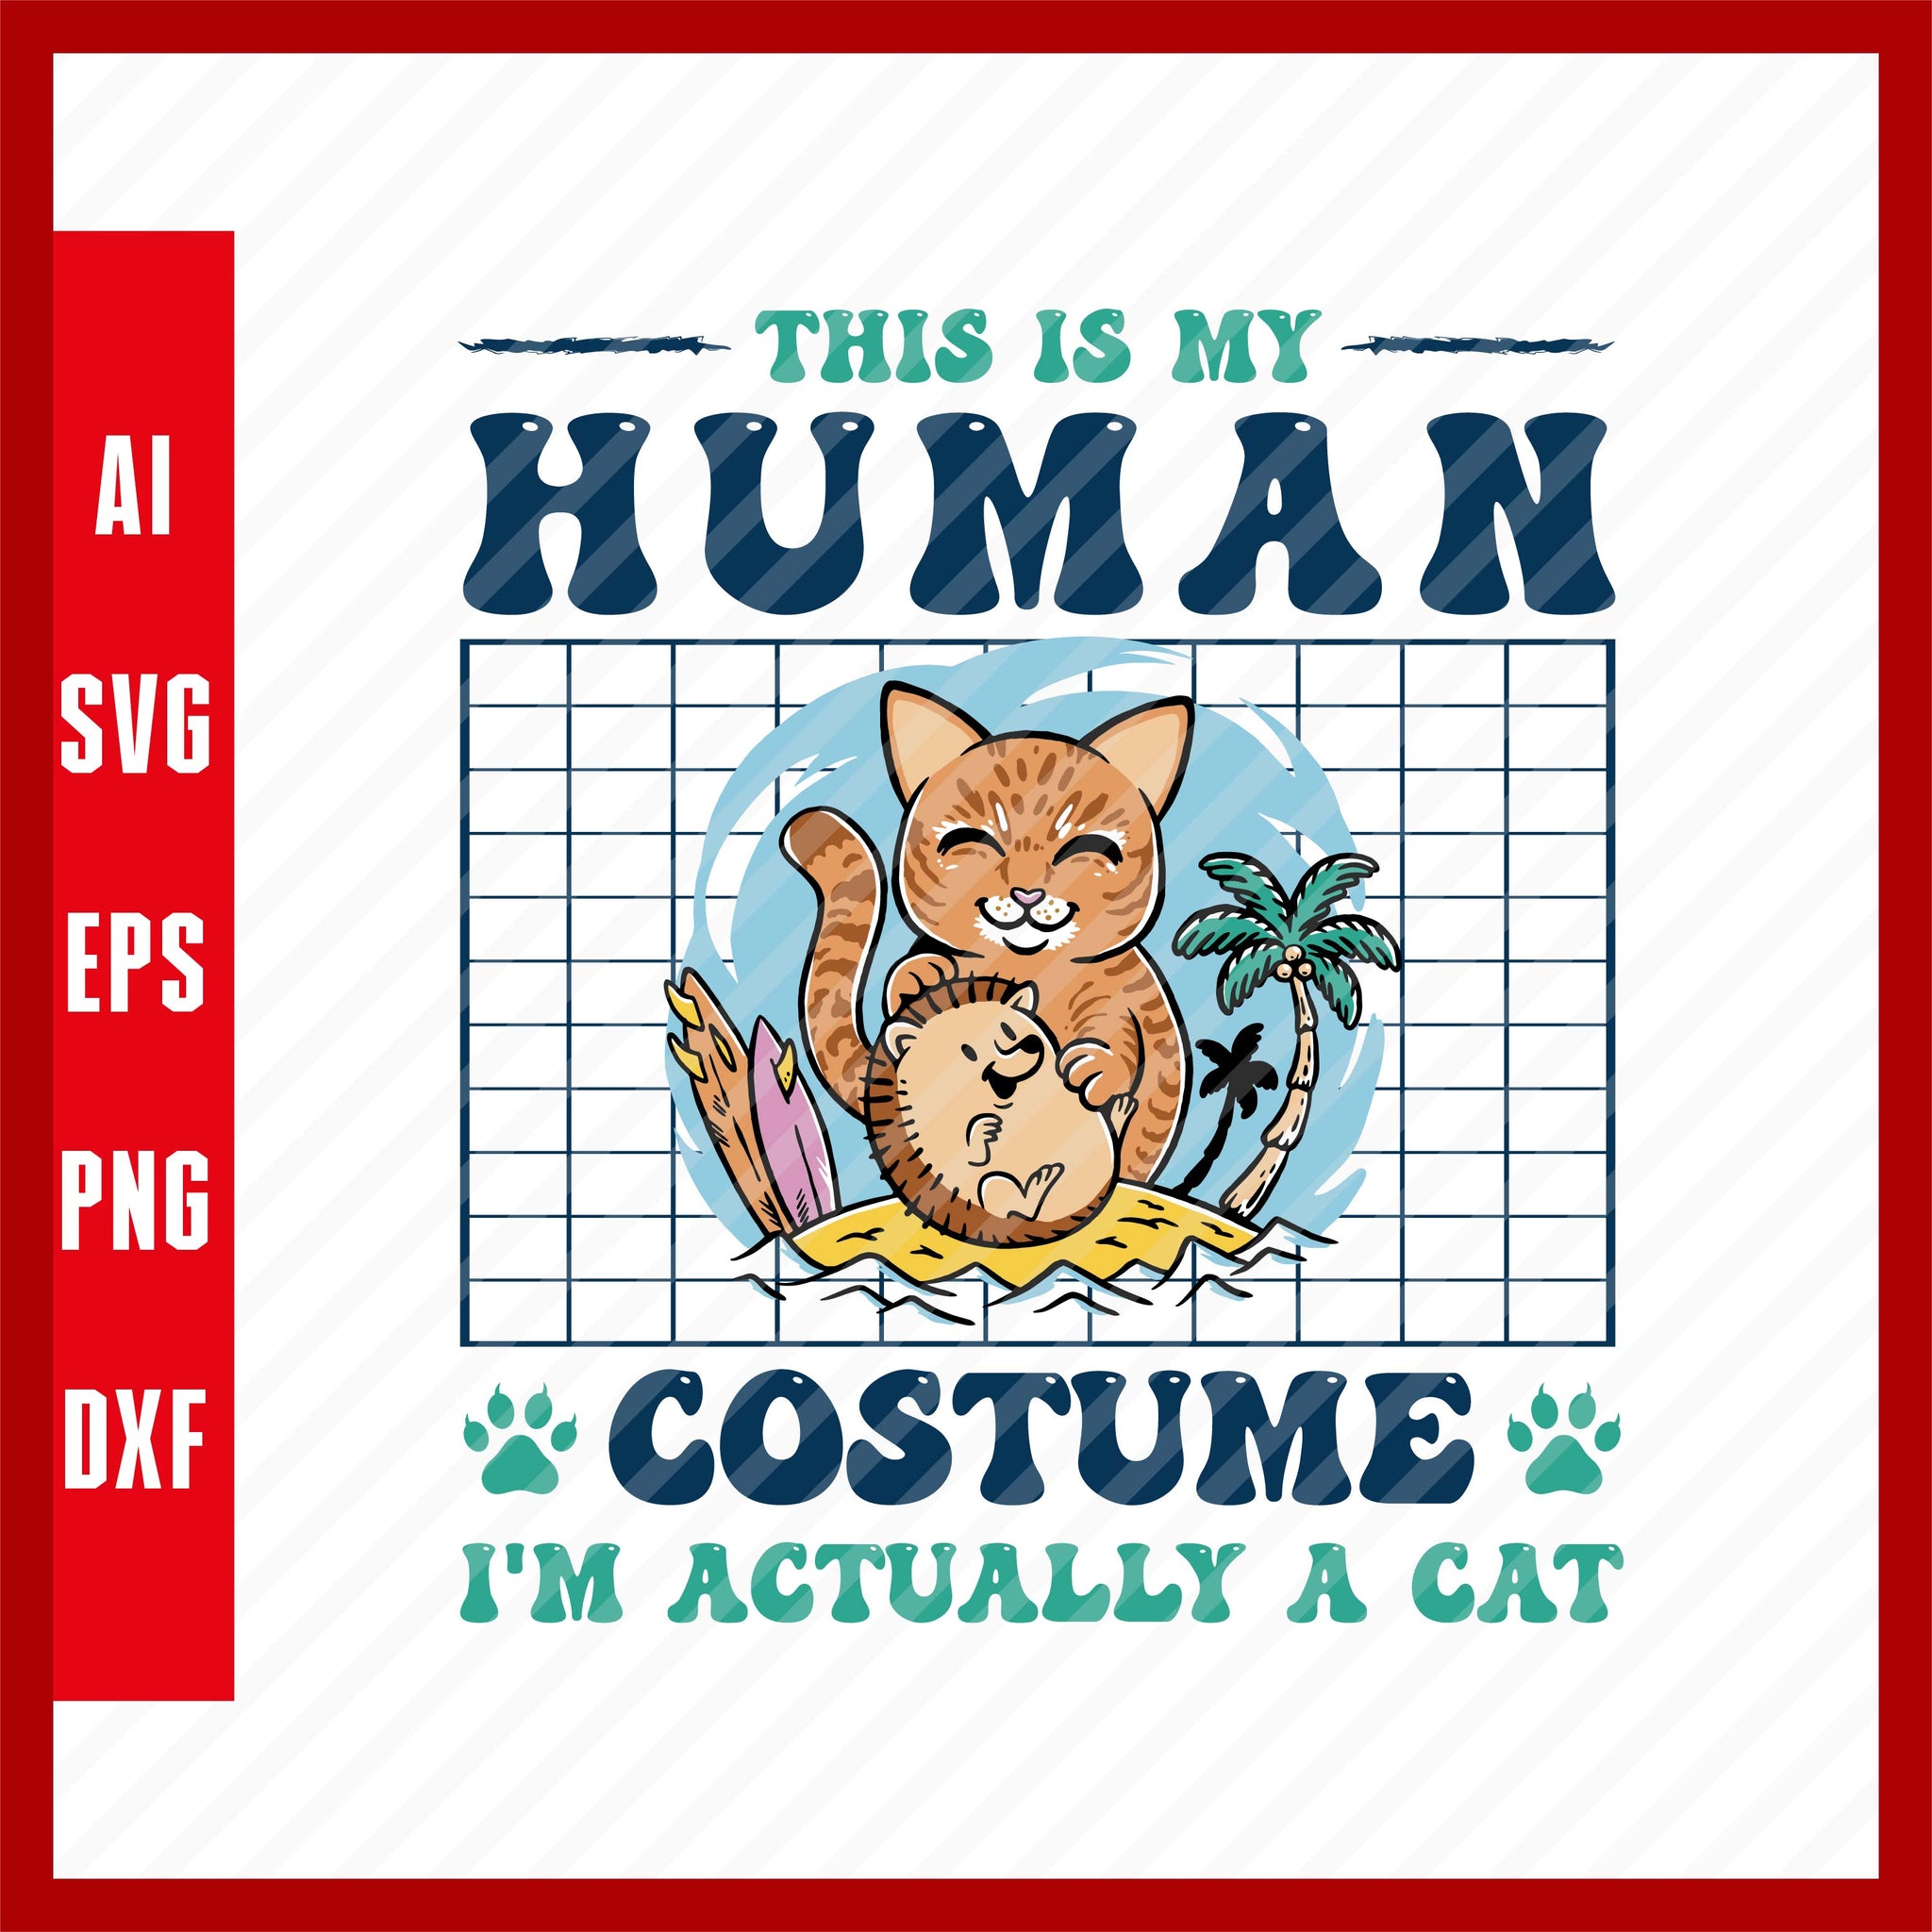 This is my Human Costume I'm actually a Cat, Cat Pets Lover Funny Summer T-Shirt Design EPS, Ai, PNG, SVG and PDF Printable Files